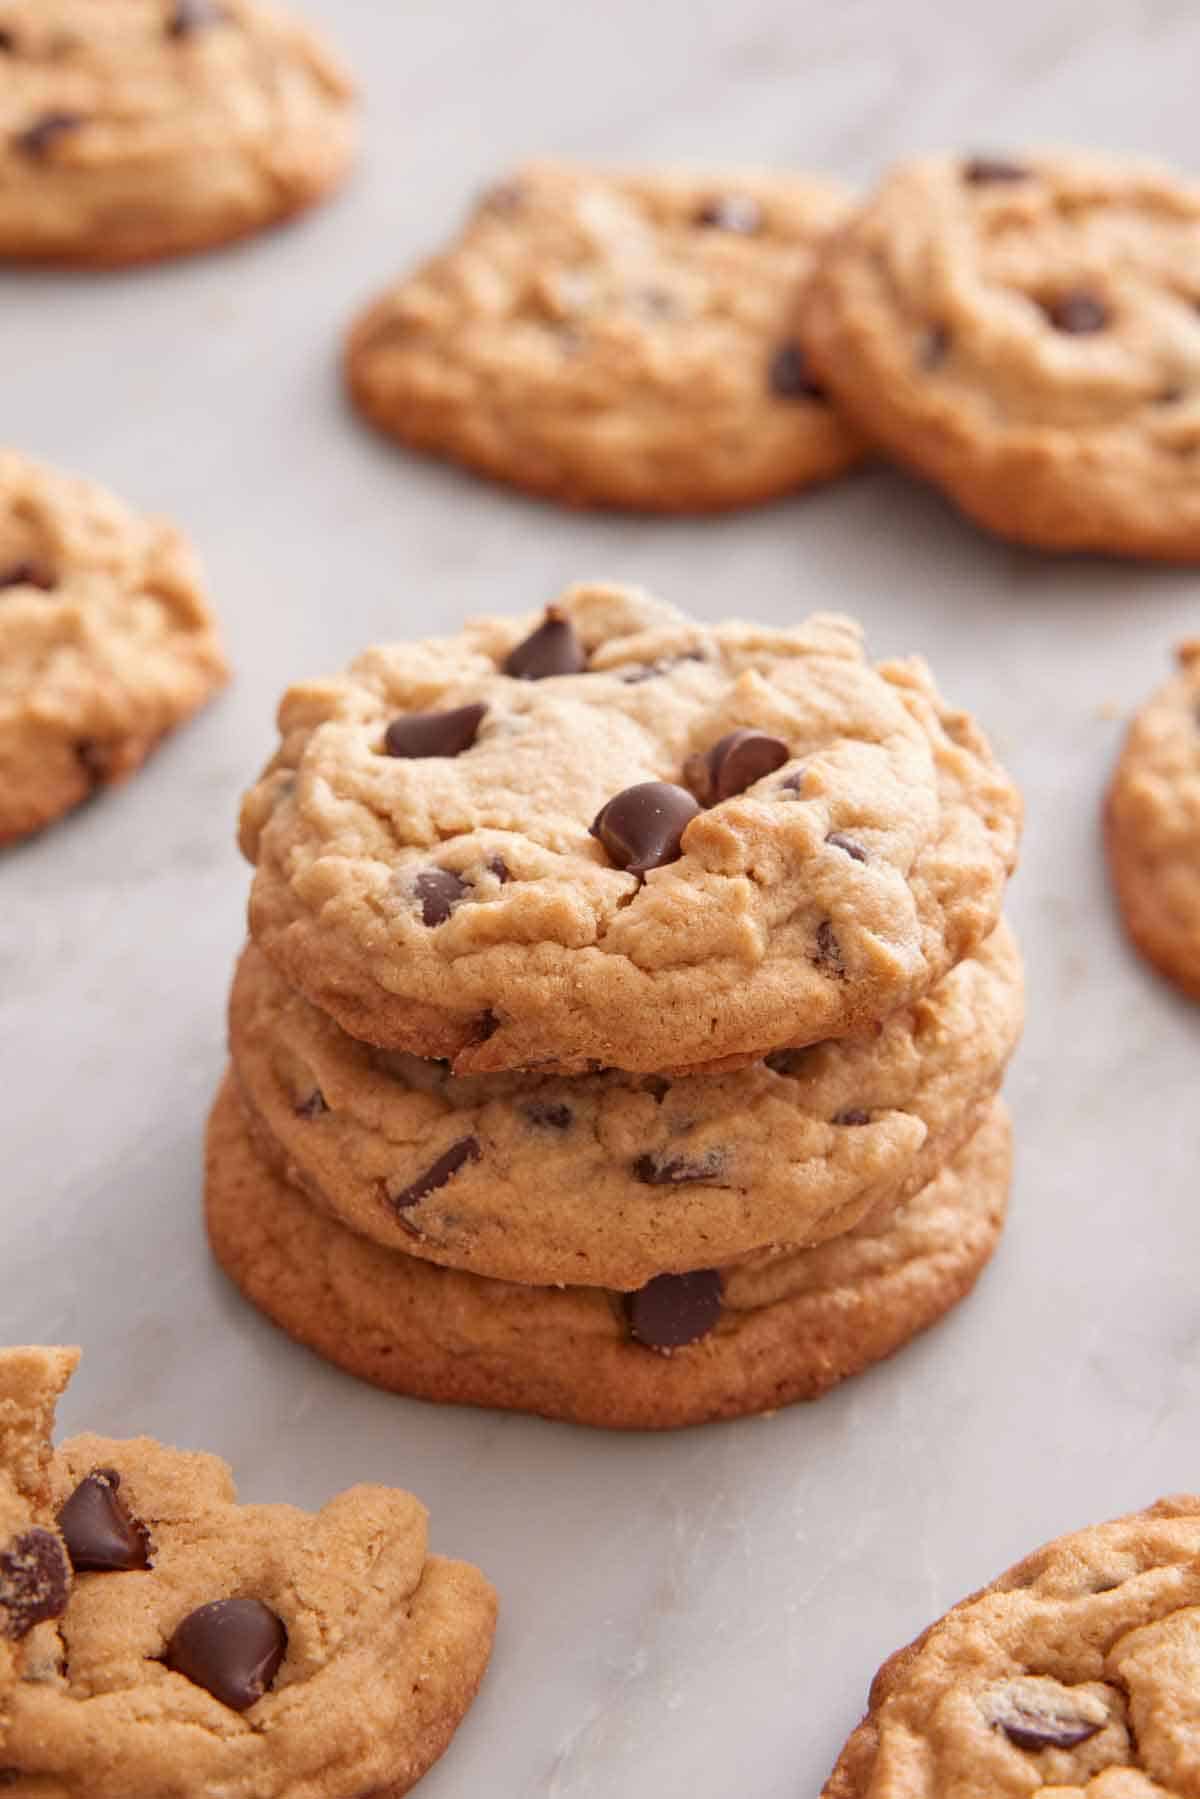 A stack of three peanut butter chocolate chip cookies with more scattered around.